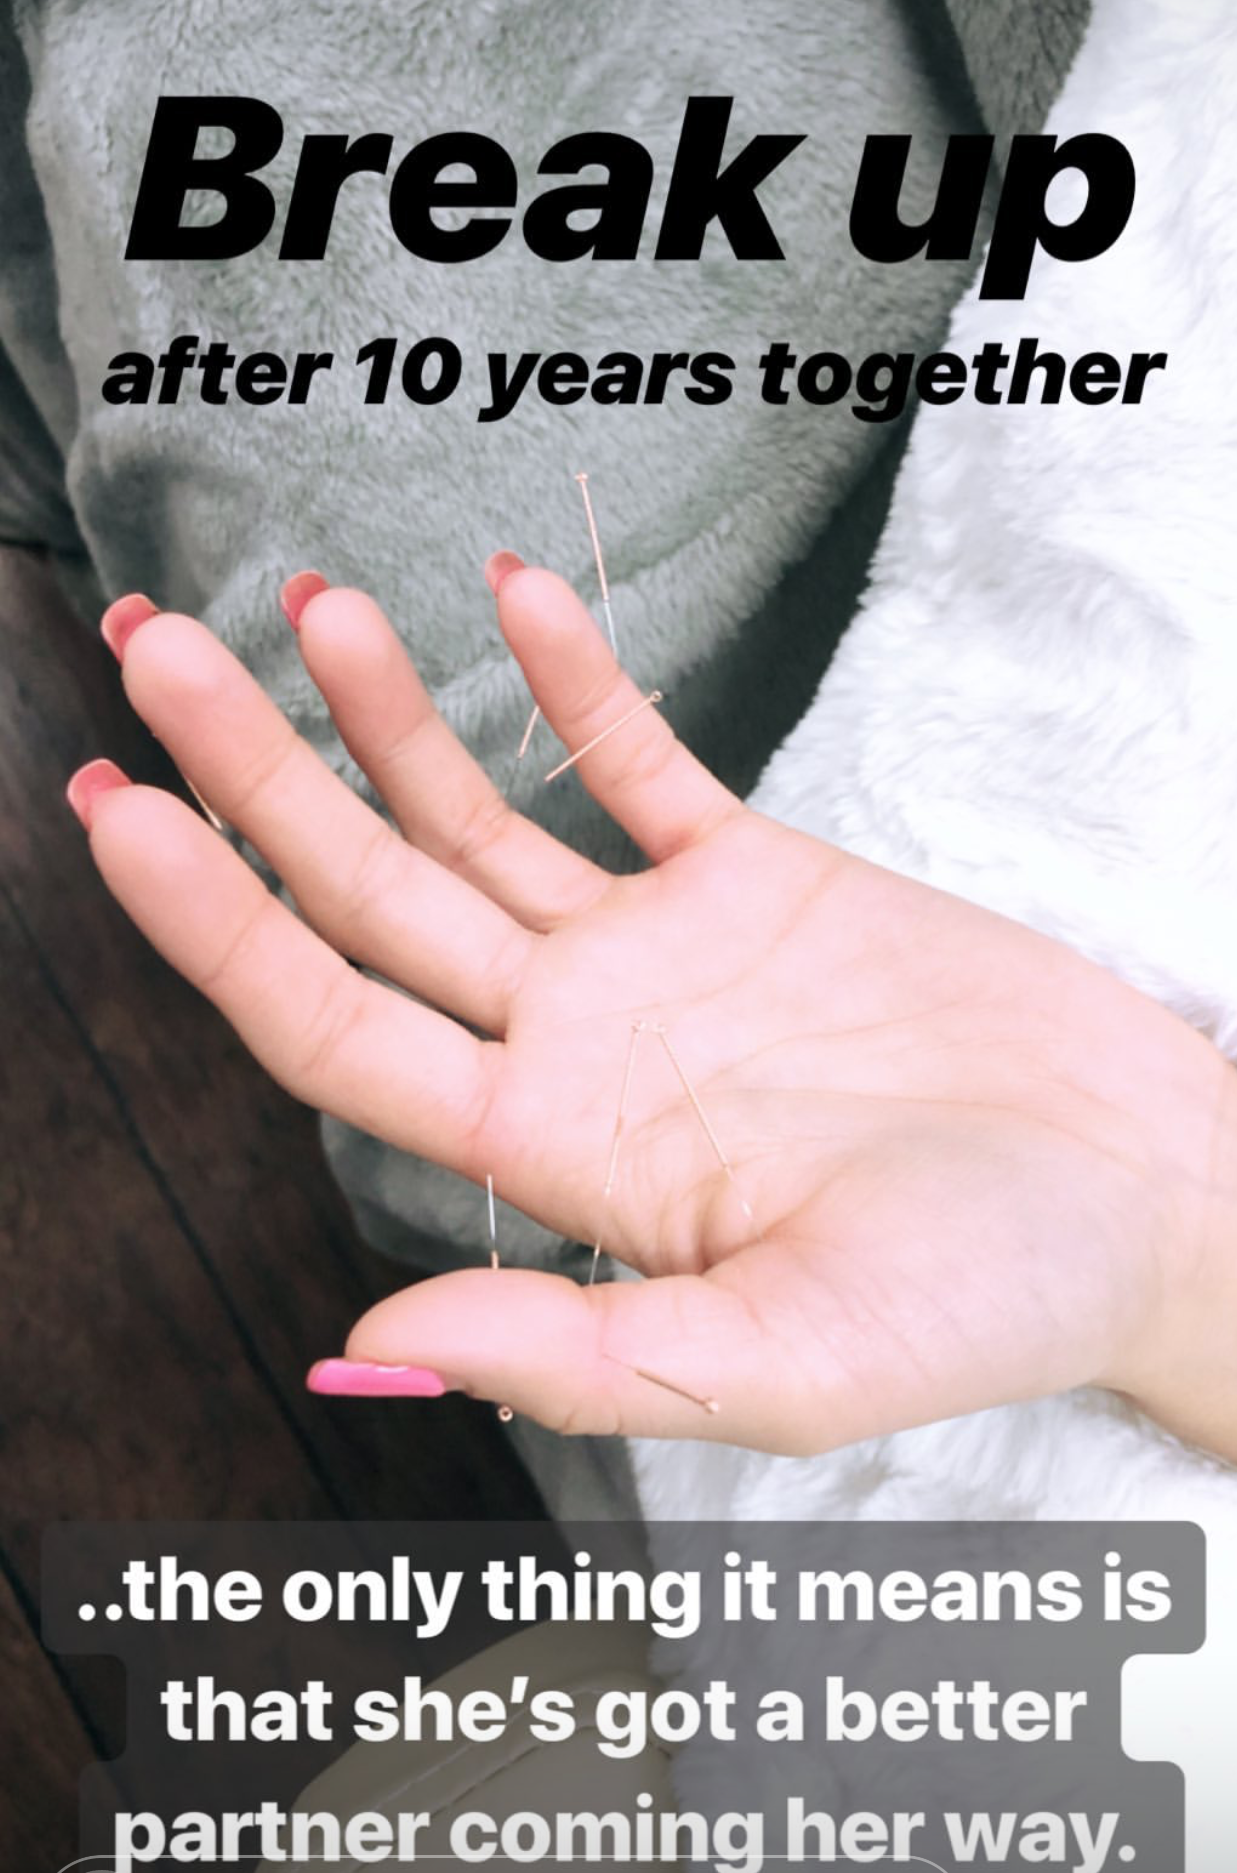  Sujok acupuncture treatment used for couples therapy, often times to work through unstable relationships ending up in breakup after longer relationship years  